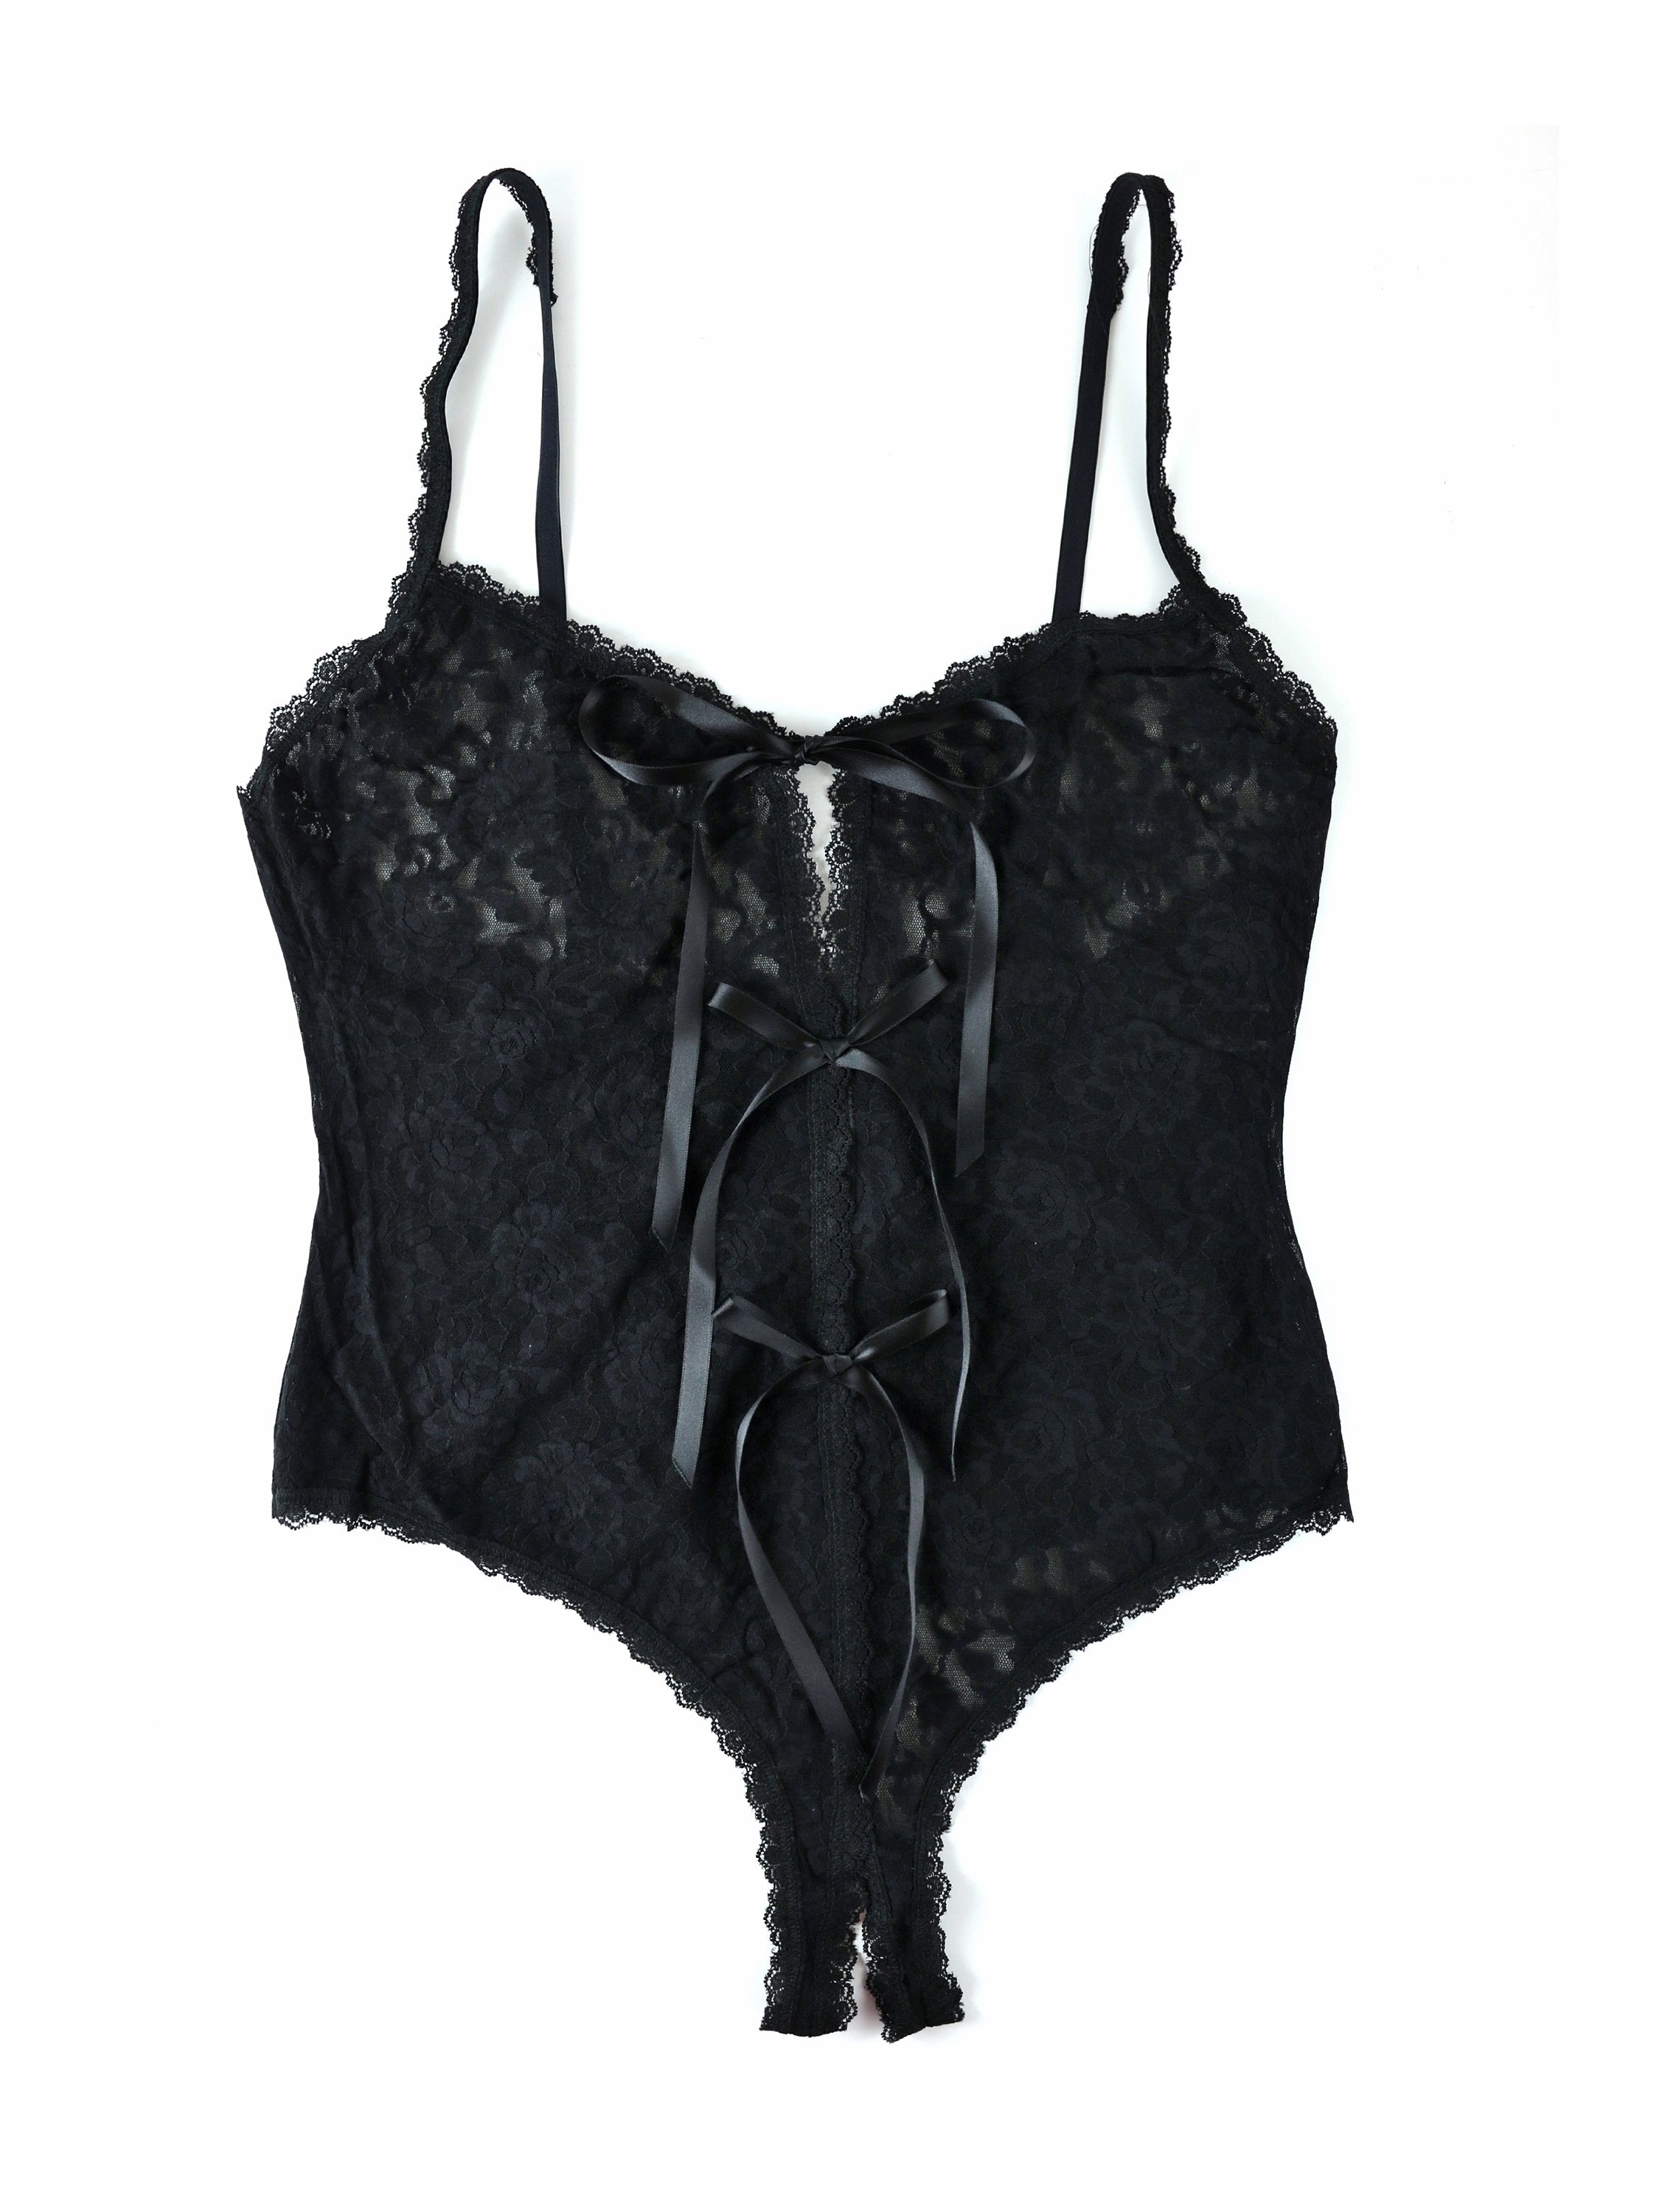 After Midnight Crotchless Thong Bodysuit